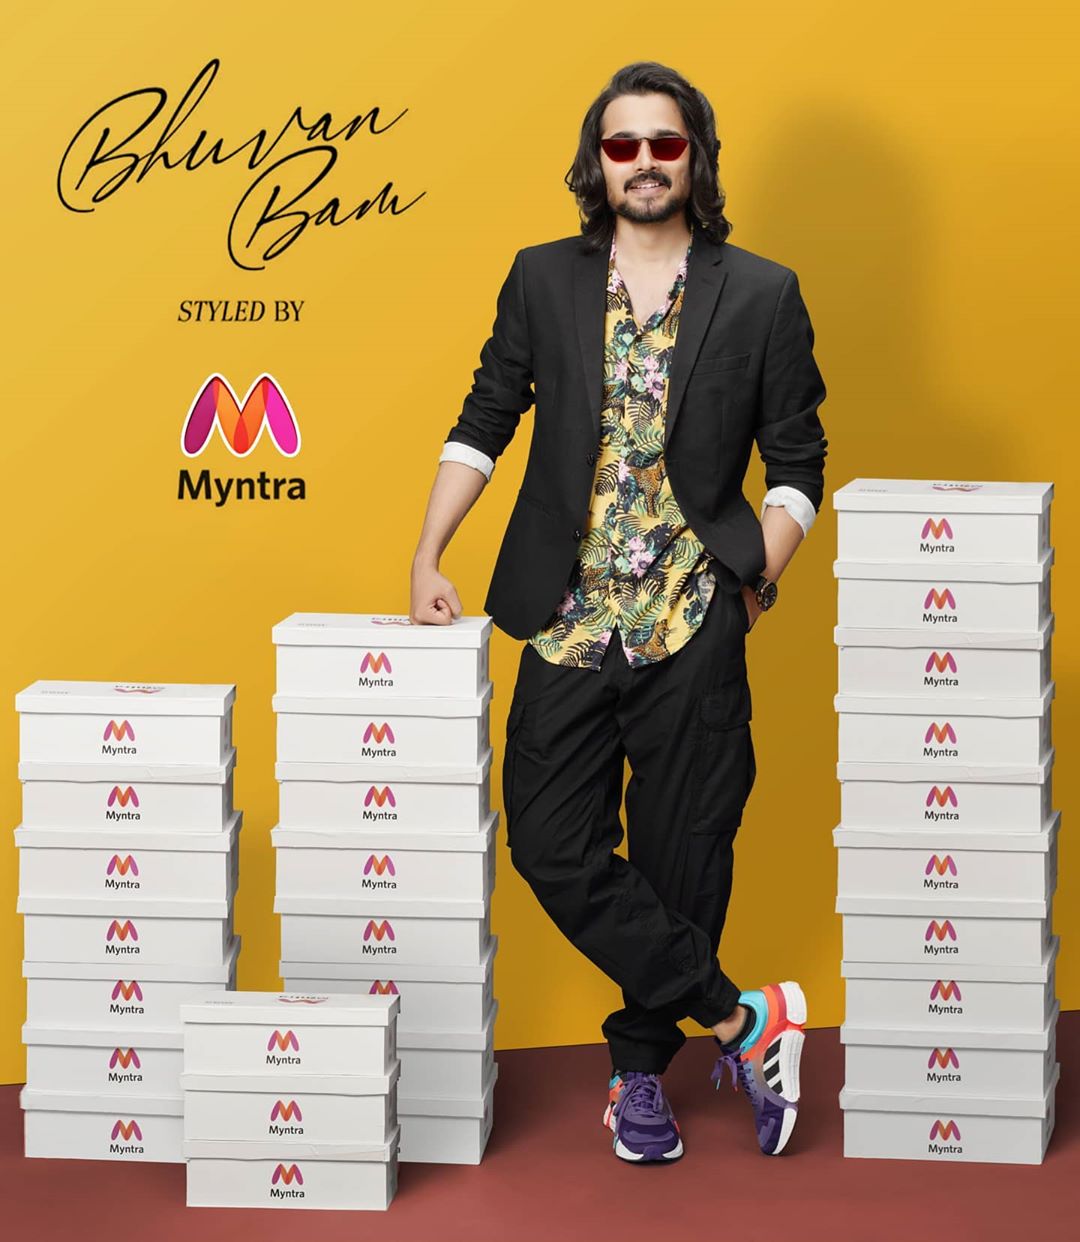 MYNTRA - #BhuvanBamStyledByMyntra - A #moment we will cherish forever! Super excited & happy to welcome @bhuvan.bam22 to the #Myntra family.

Raise your hand 🙋 if you ❤ #BhuvanBam too.

Waiting for so...